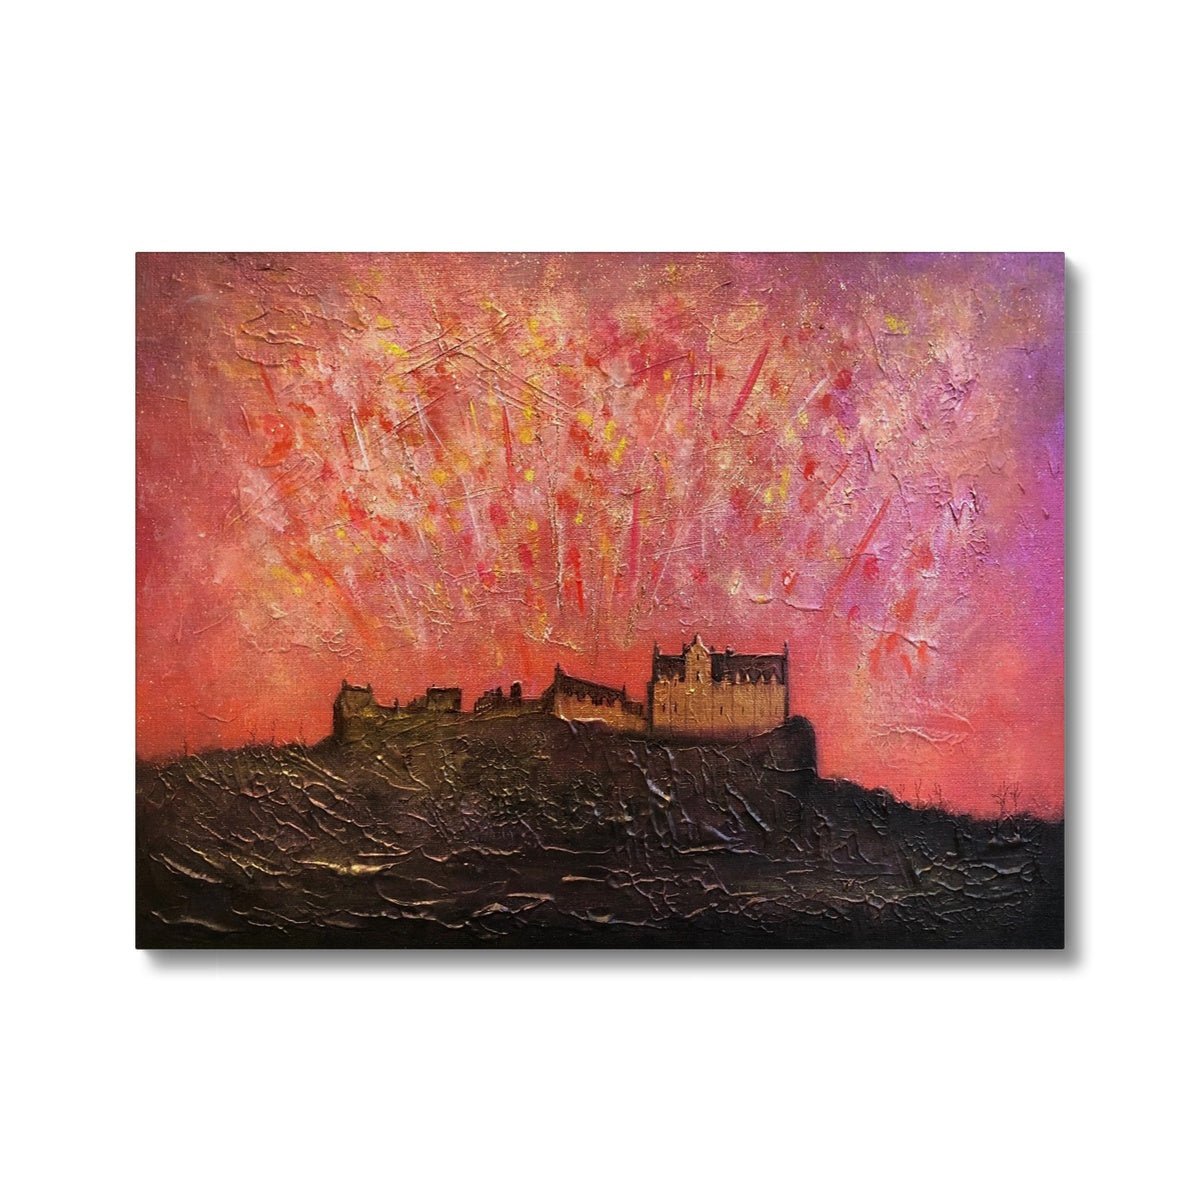 Edinburgh Castle Fireworks Painting | Canvas From Scotland-Contemporary Stretched Canvas Prints-Historic & Iconic Scotland Art Gallery-24"x18"-Paintings, Prints, Homeware, Art Gifts From Scotland By Scottish Artist Kevin Hunter